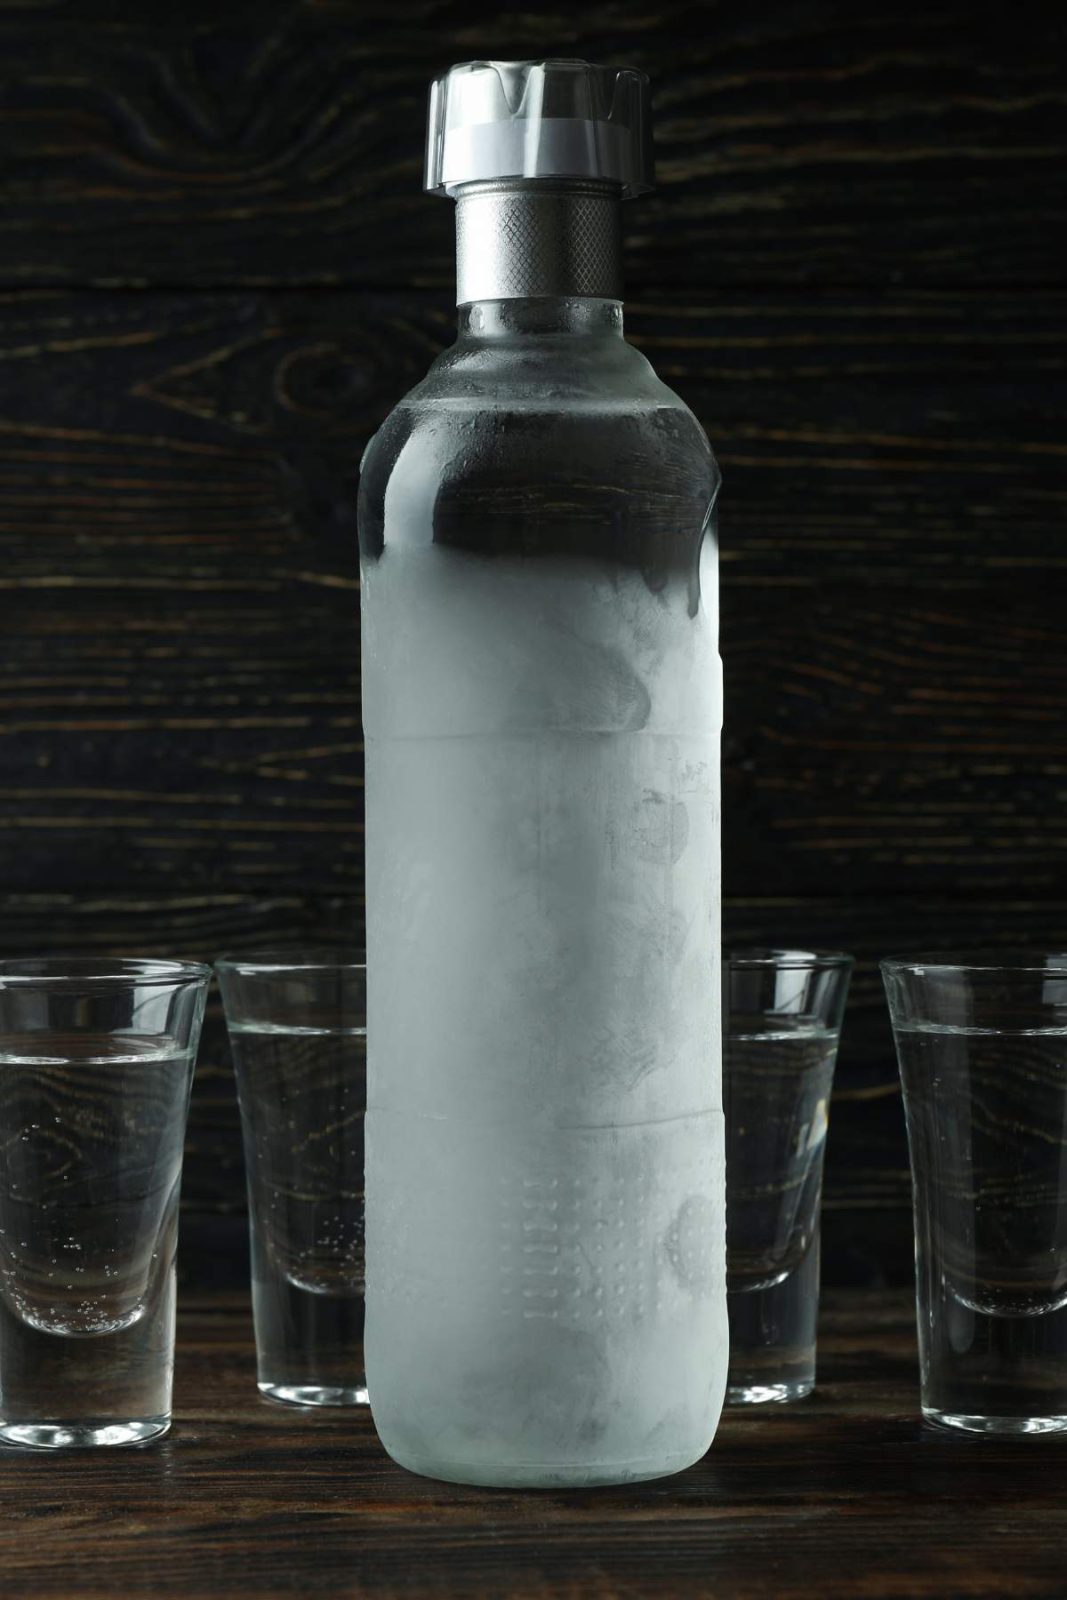 Vodka is a beloved spirit that has gained global popularity over the years. It serves as a base for countless cocktails and is enjoyed by many straight up or on the rocks. While there is an abundance of vodka brands available, the realm of top shelf vodka stands out as the epitome of luxury and refinement.